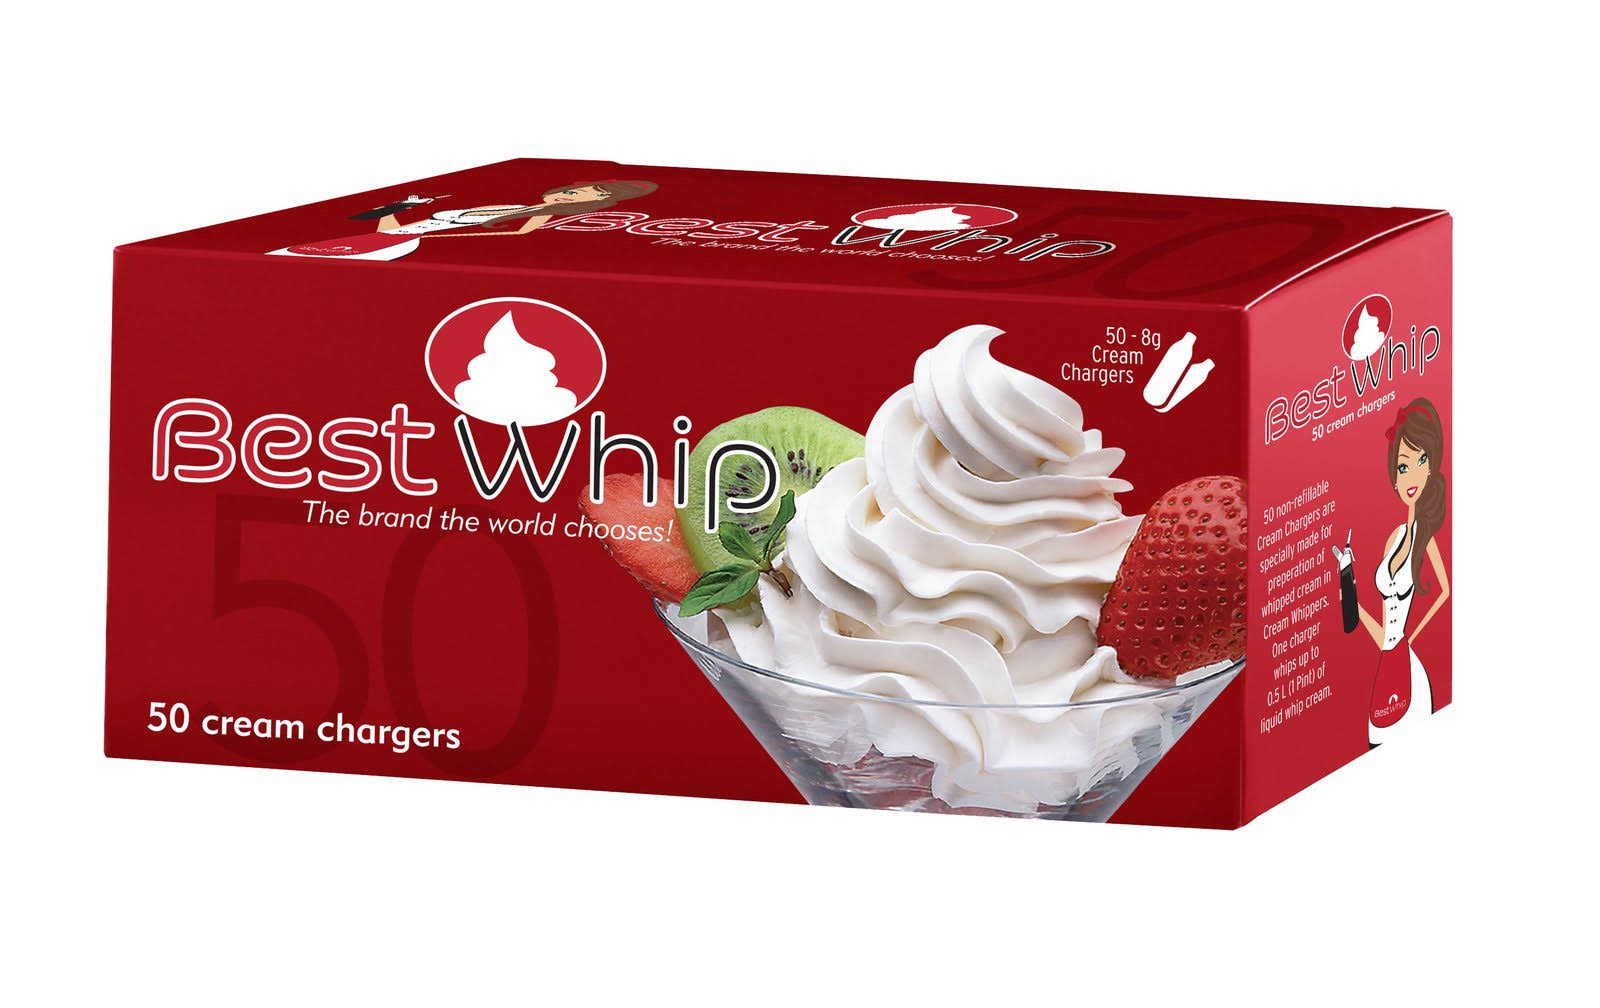 Best Whip N20 Whipped Cream Chargers - 600 Pack